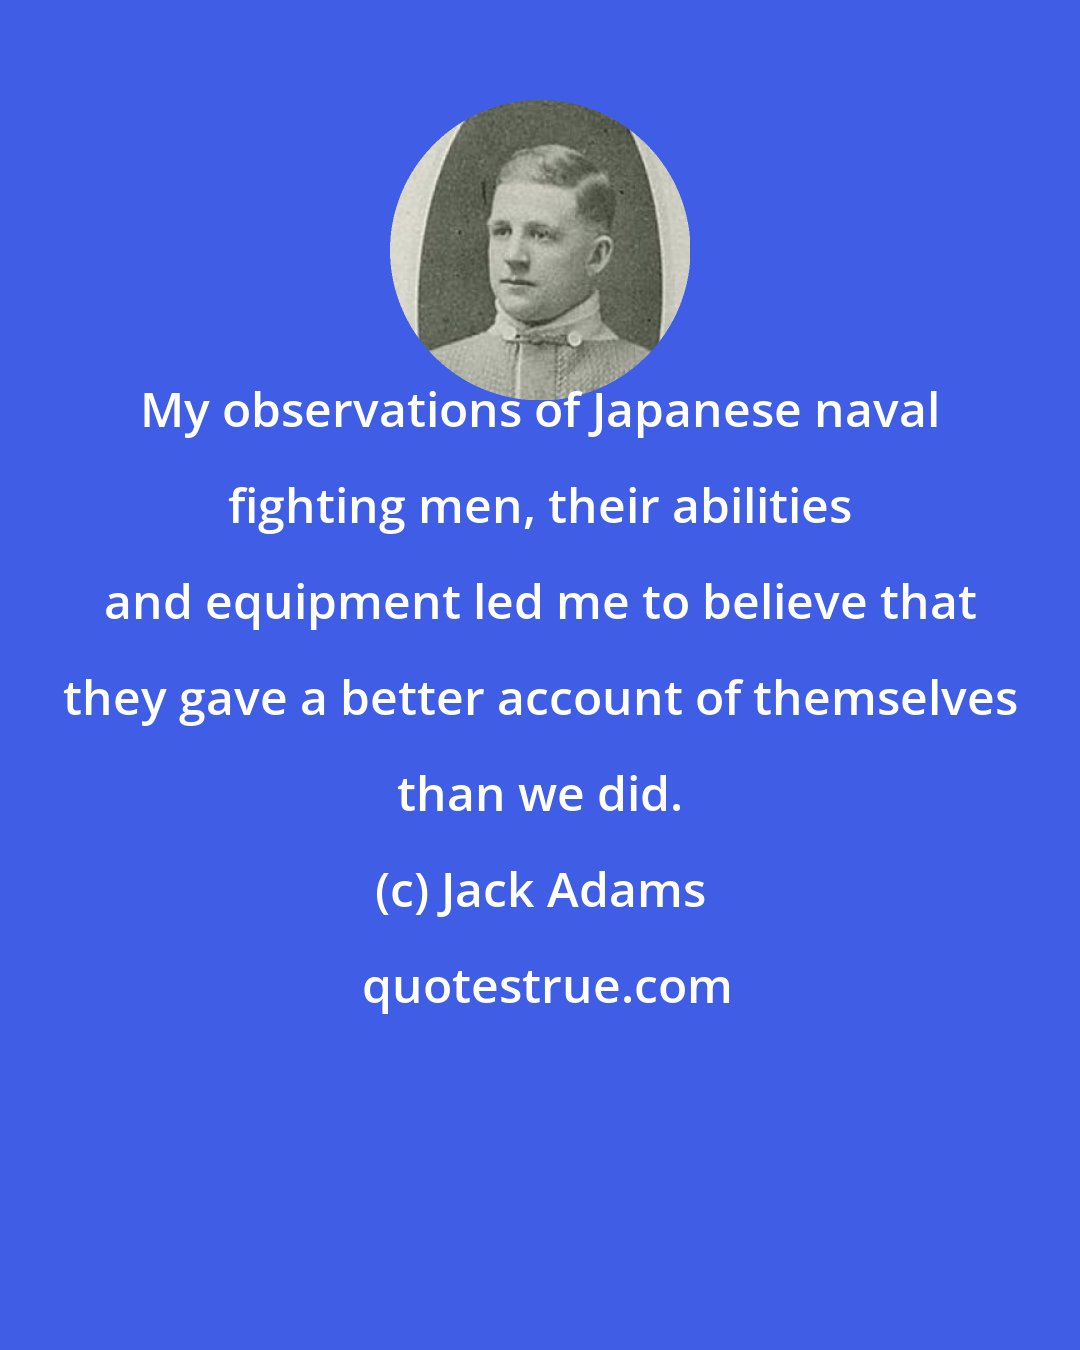 Jack Adams: My observations of Japanese naval fighting men, their abilities and equipment led me to believe that they gave a better account of themselves than we did.